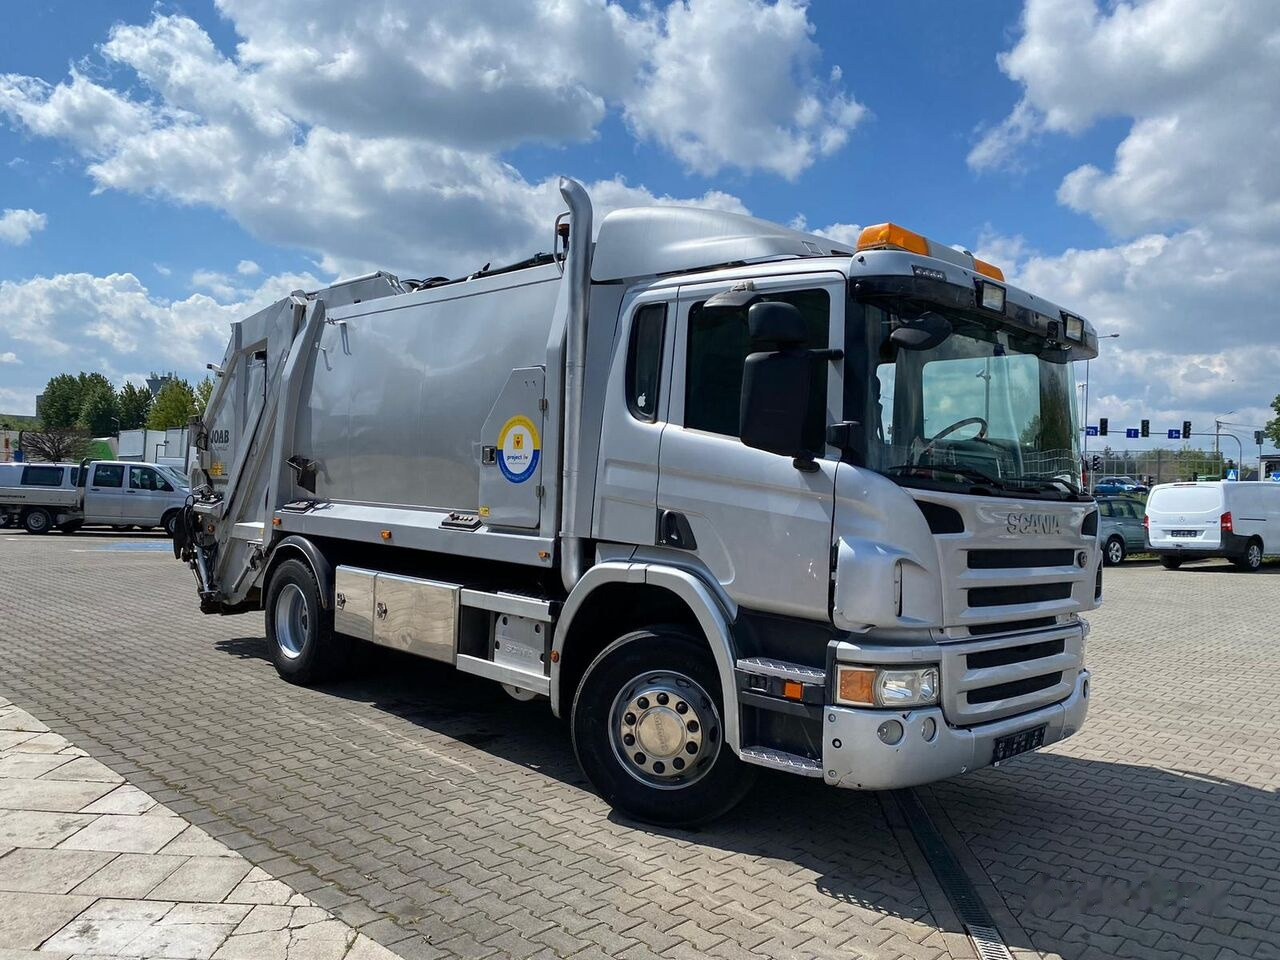 Scania P230DB / JOAB ANACONDA TWIN 13.3m3 / 1 OWNER / FULL SERVICED leasing Scania P230DB / JOAB ANACONDA TWIN 13.3m3 / 1 OWNER / FULL SERVICED: picture 5